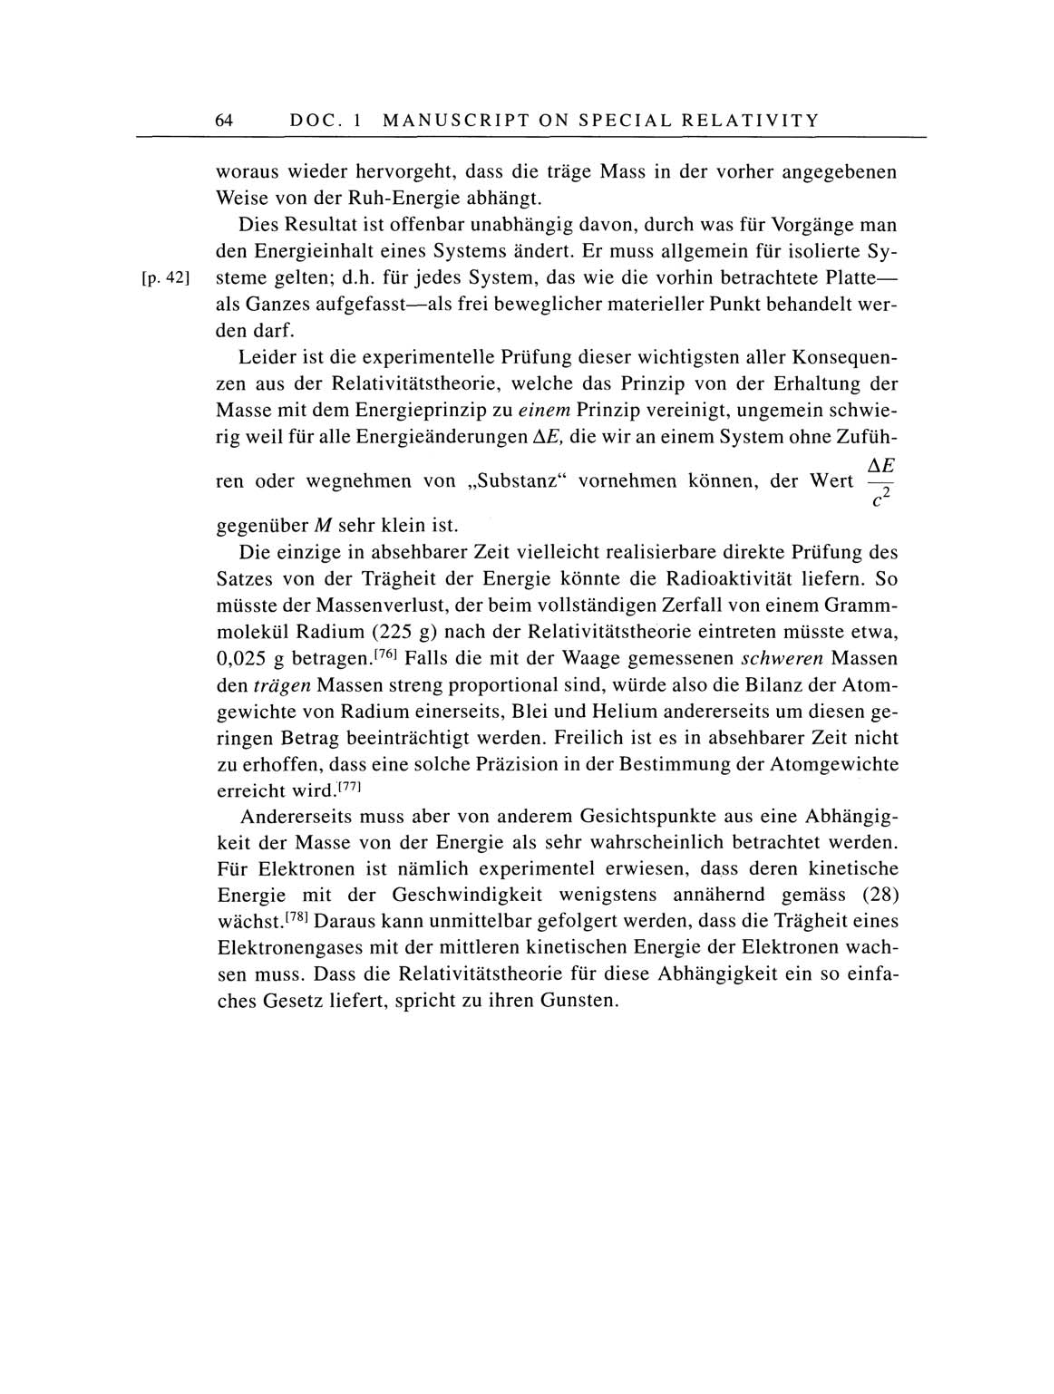 Volume 4: The Swiss Years: Writings 1912-1914 page 64